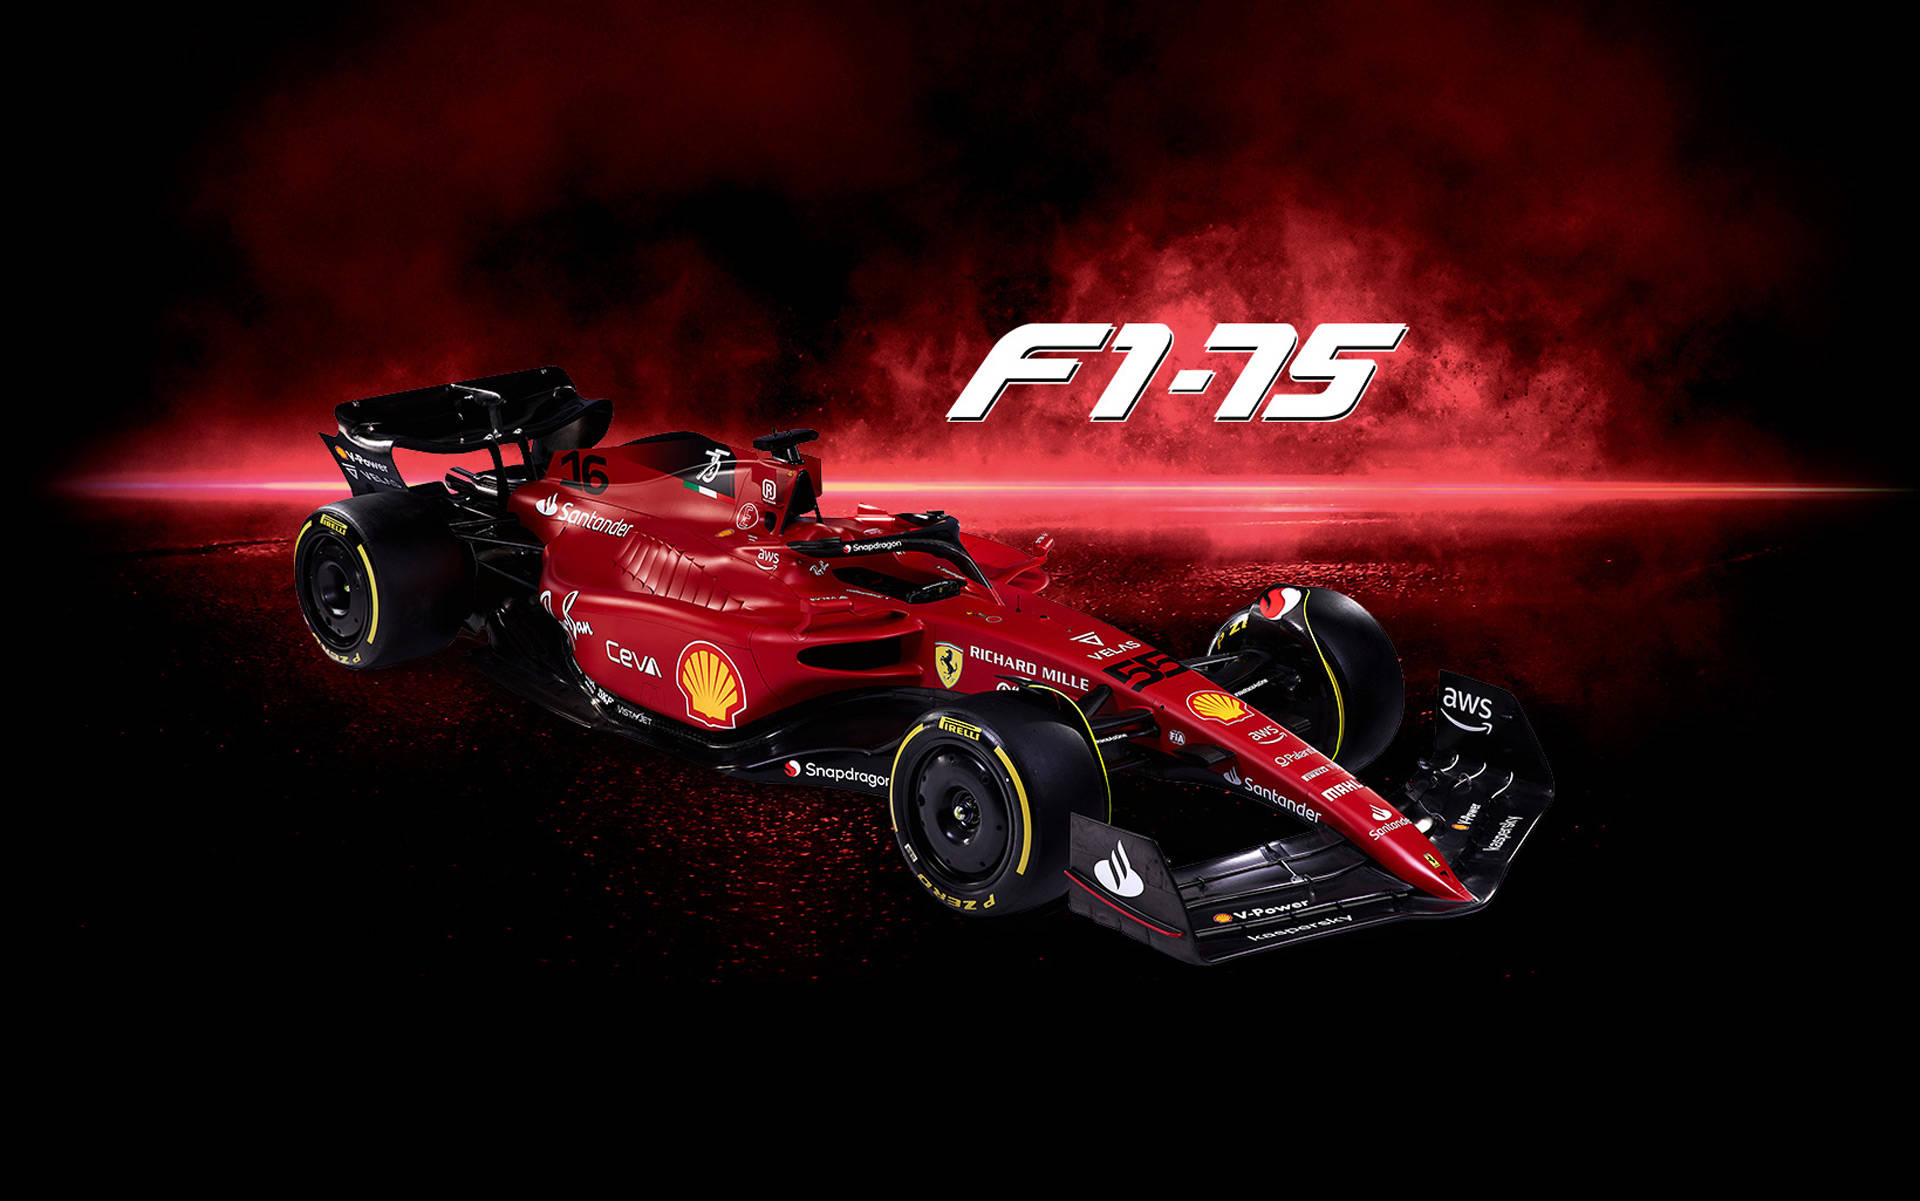 “Speed and skill go hand in hand when it comes to Formula One racing.” Wallpaper